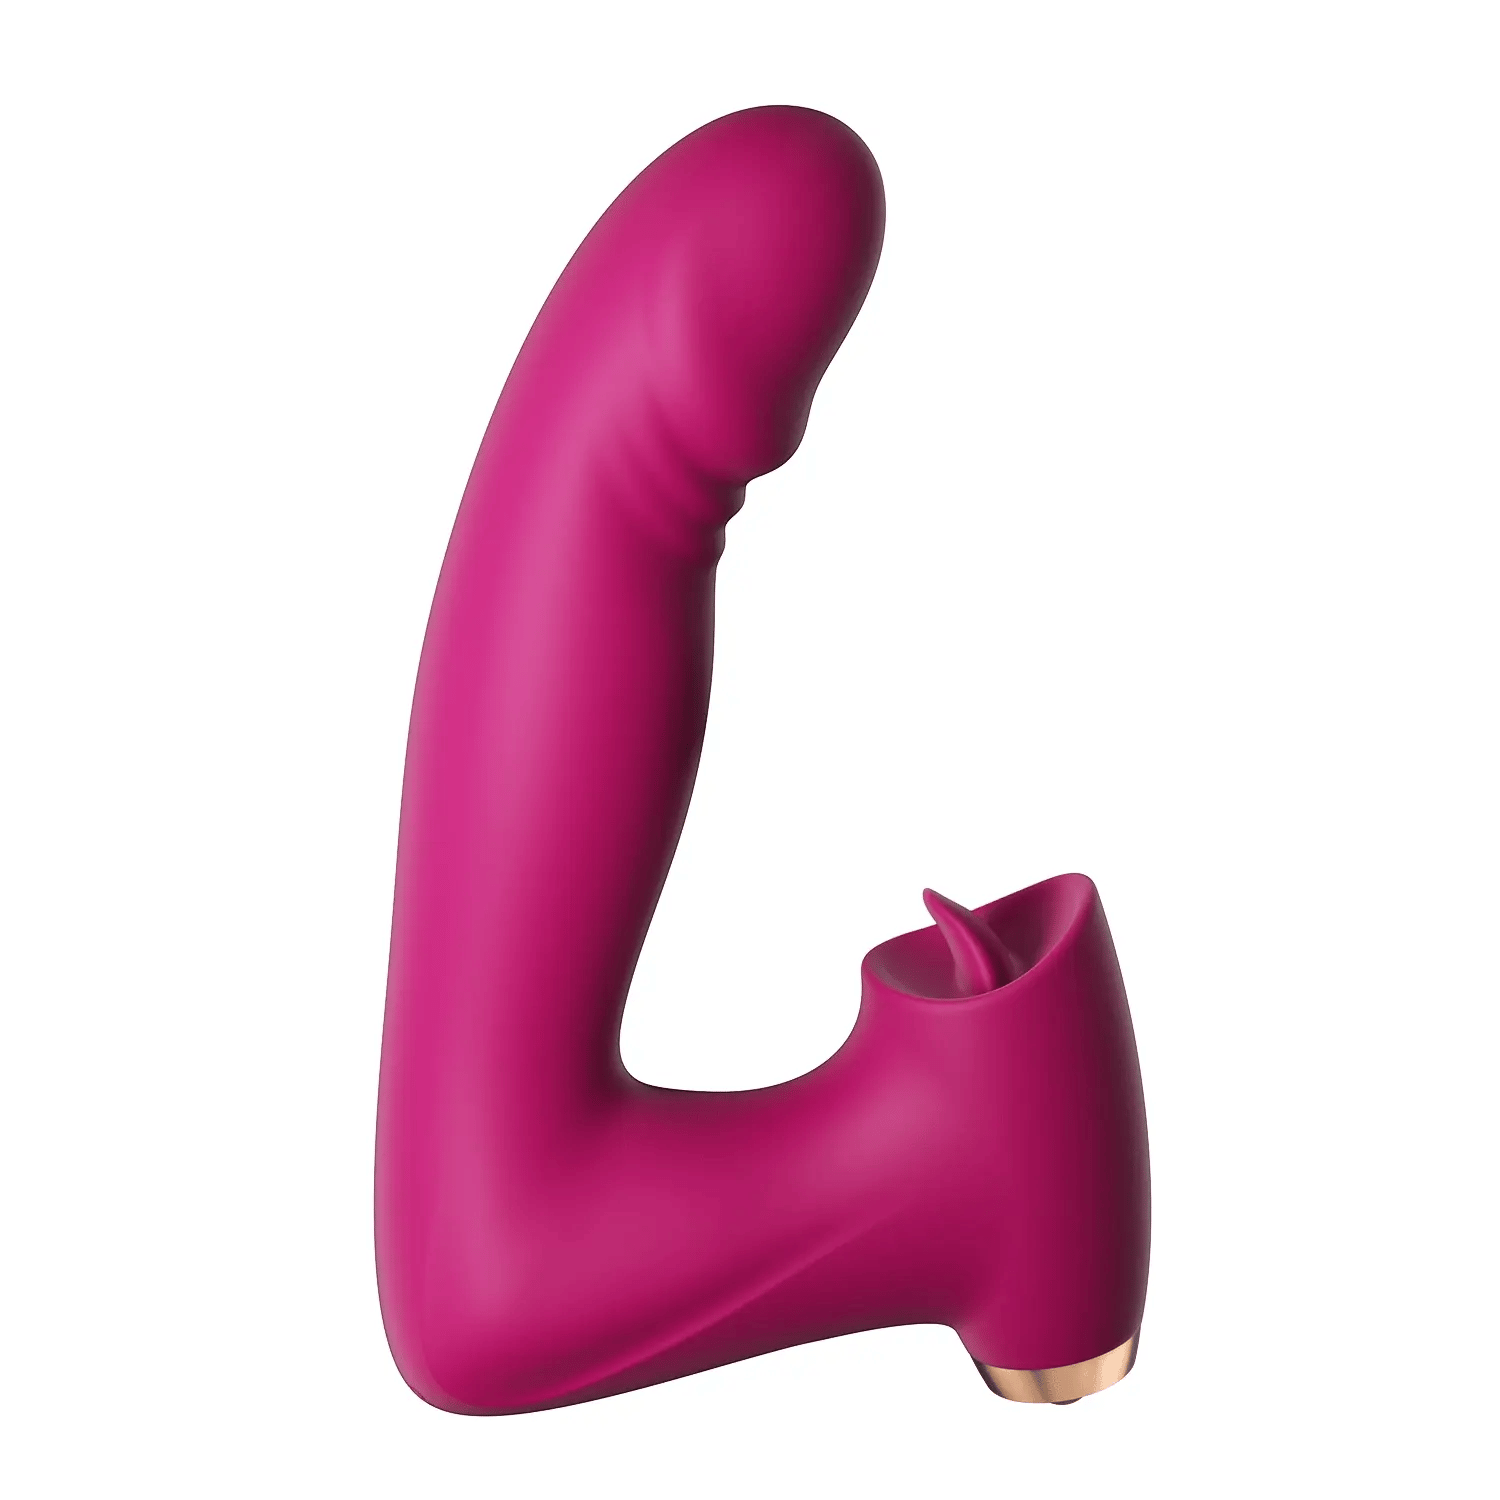 ROLA Clit Licking & Tapping G-spot Vibrator